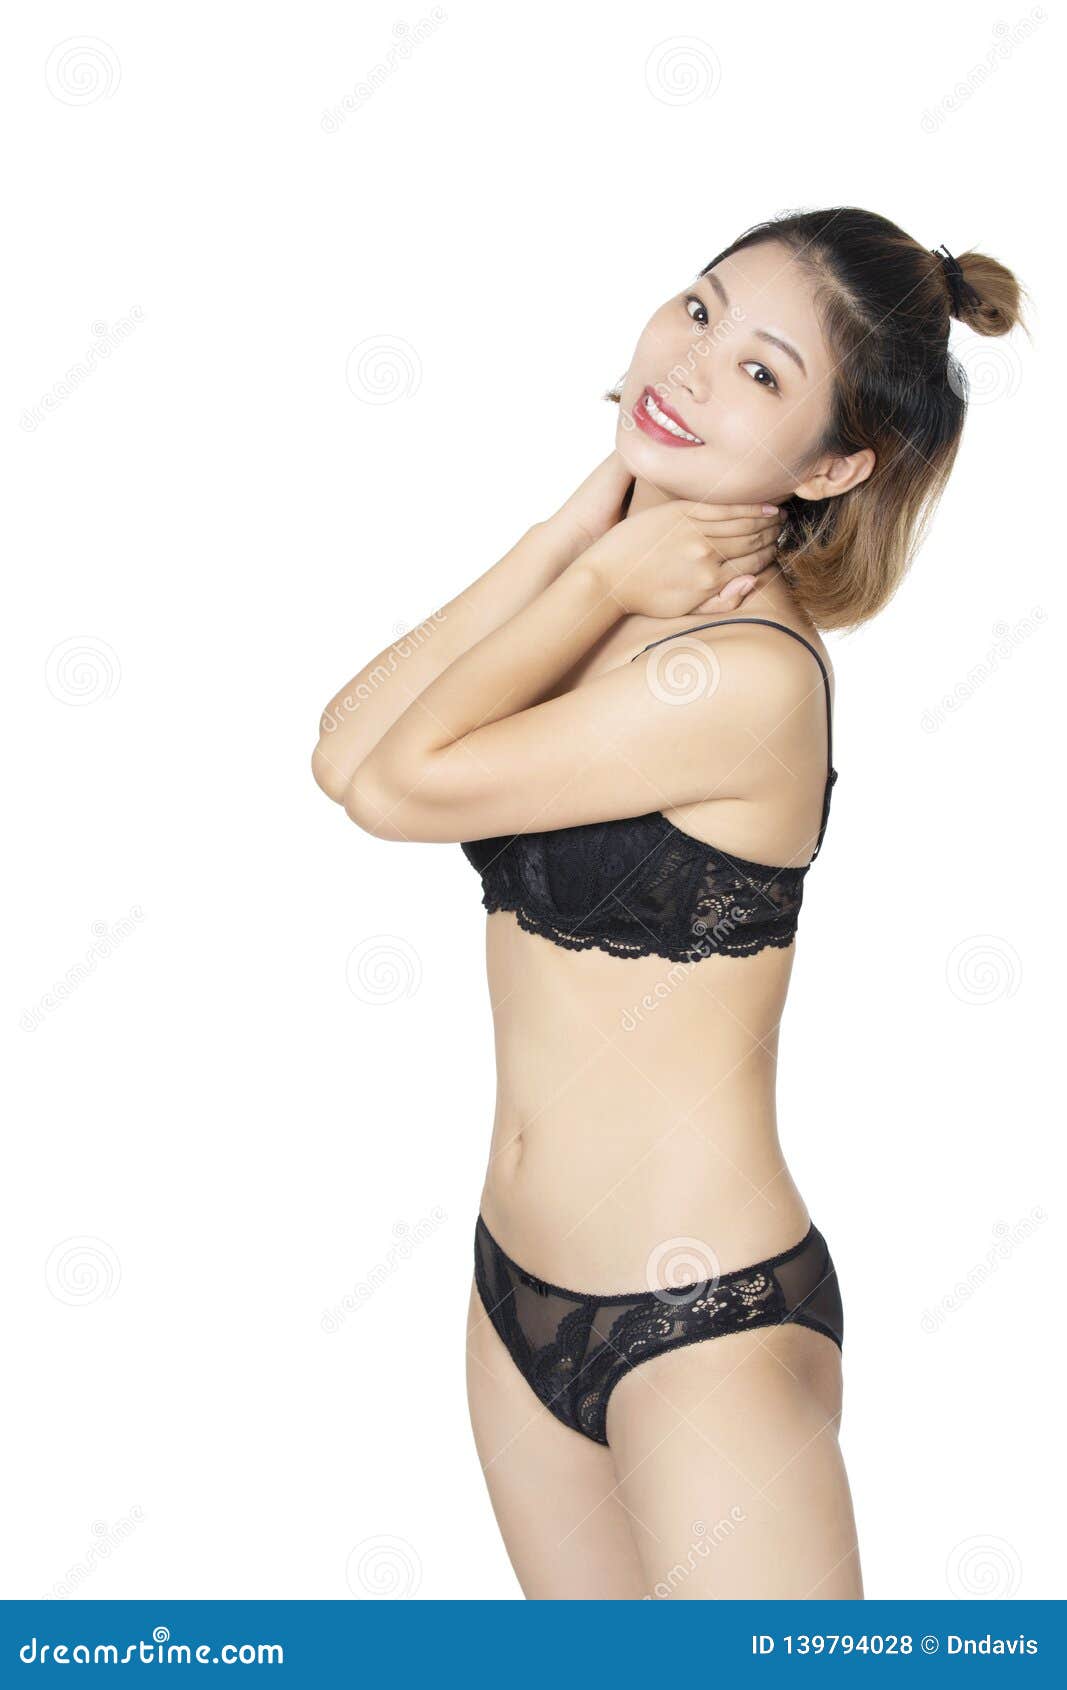 carol gist recommends young asian girls in panties pic